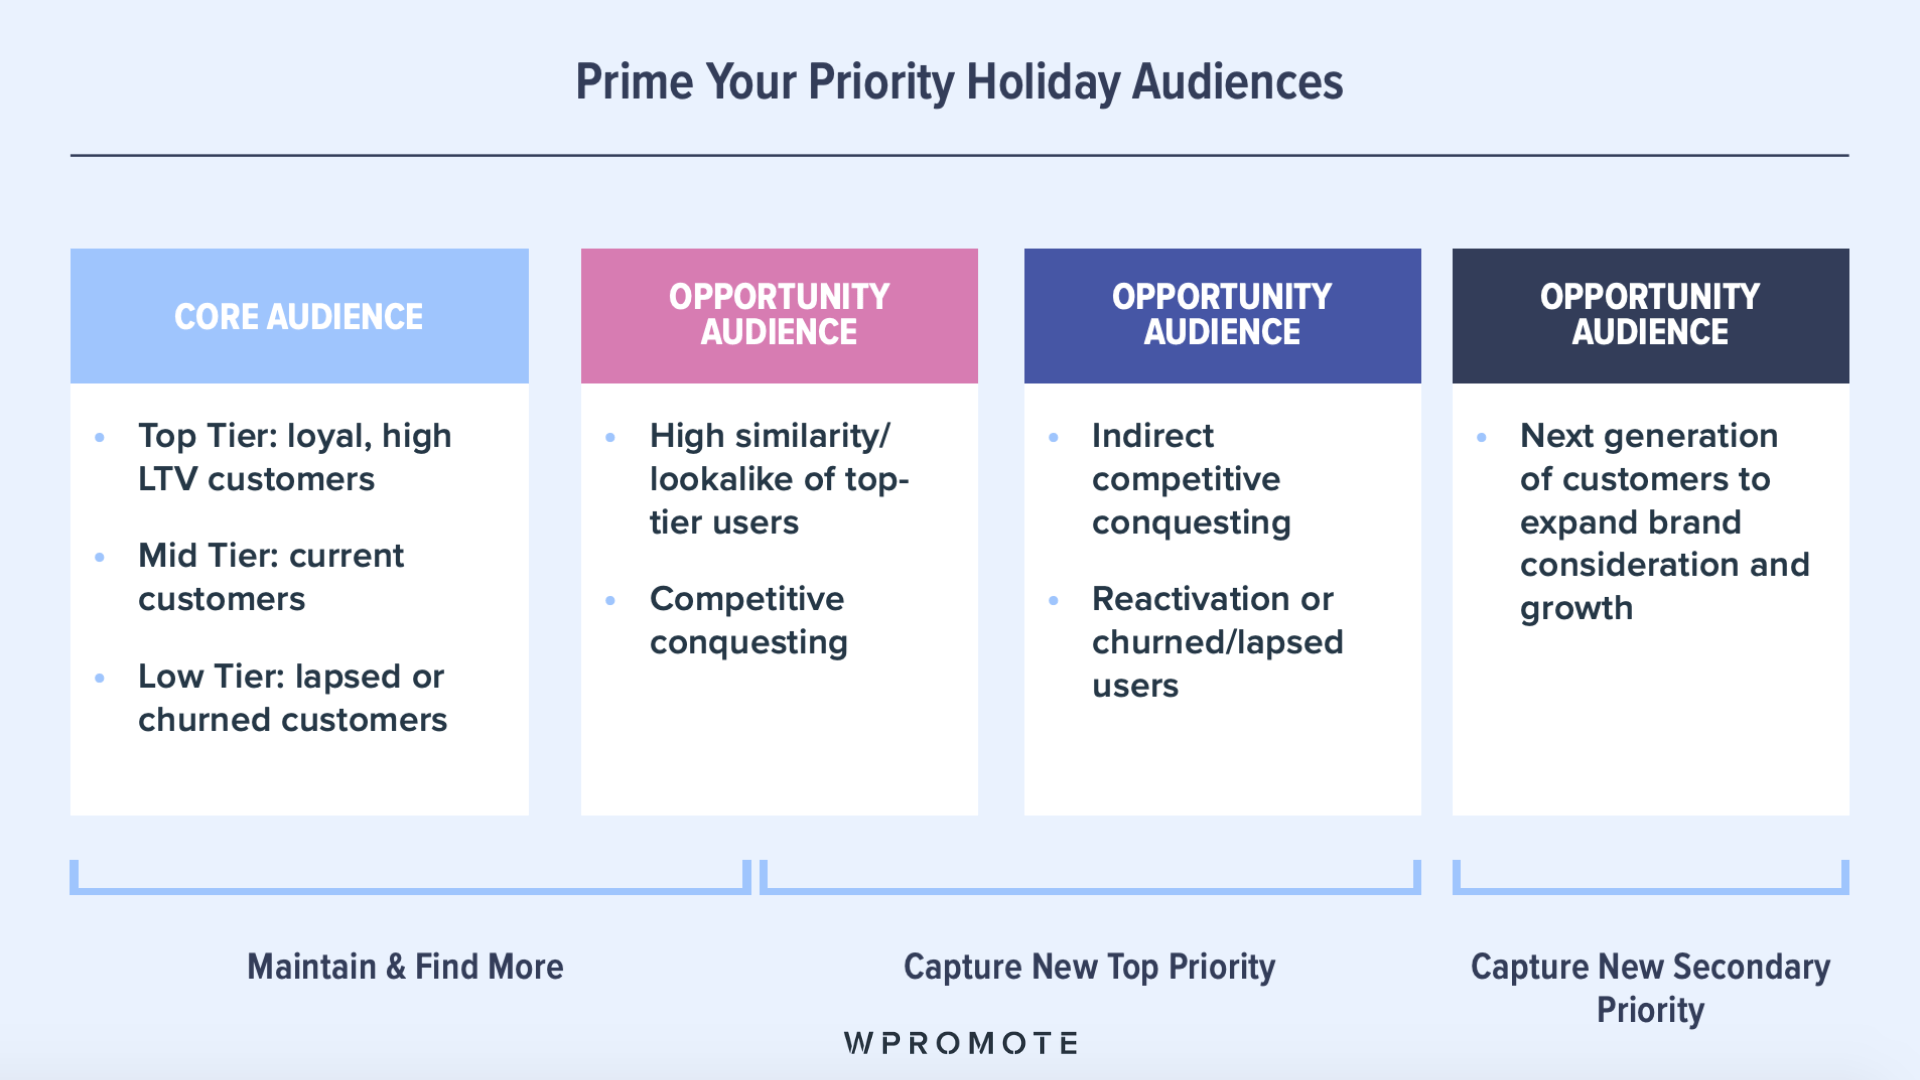 Identifying prime and opportunity audience segments for holiday campaigns